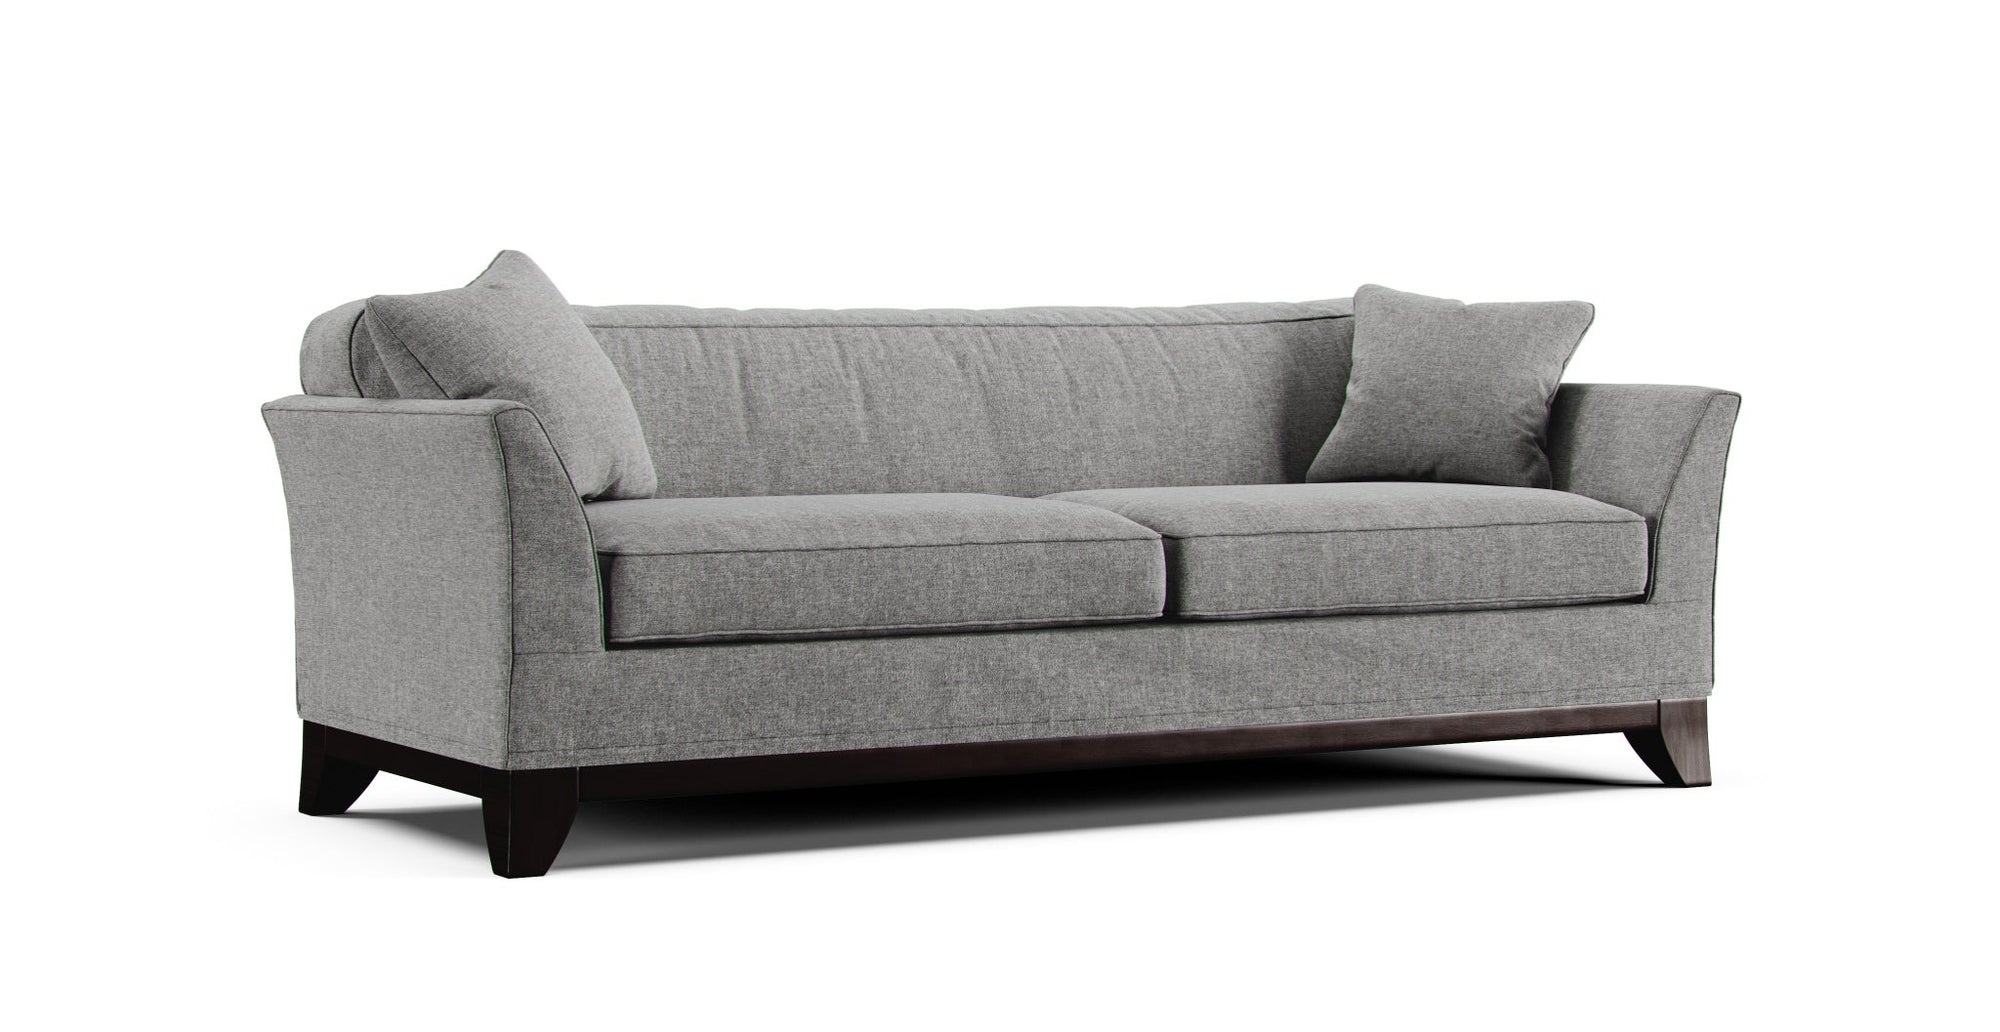 Pottery Barn Greenwich sofa featuring Performance Weave Stone slipcover